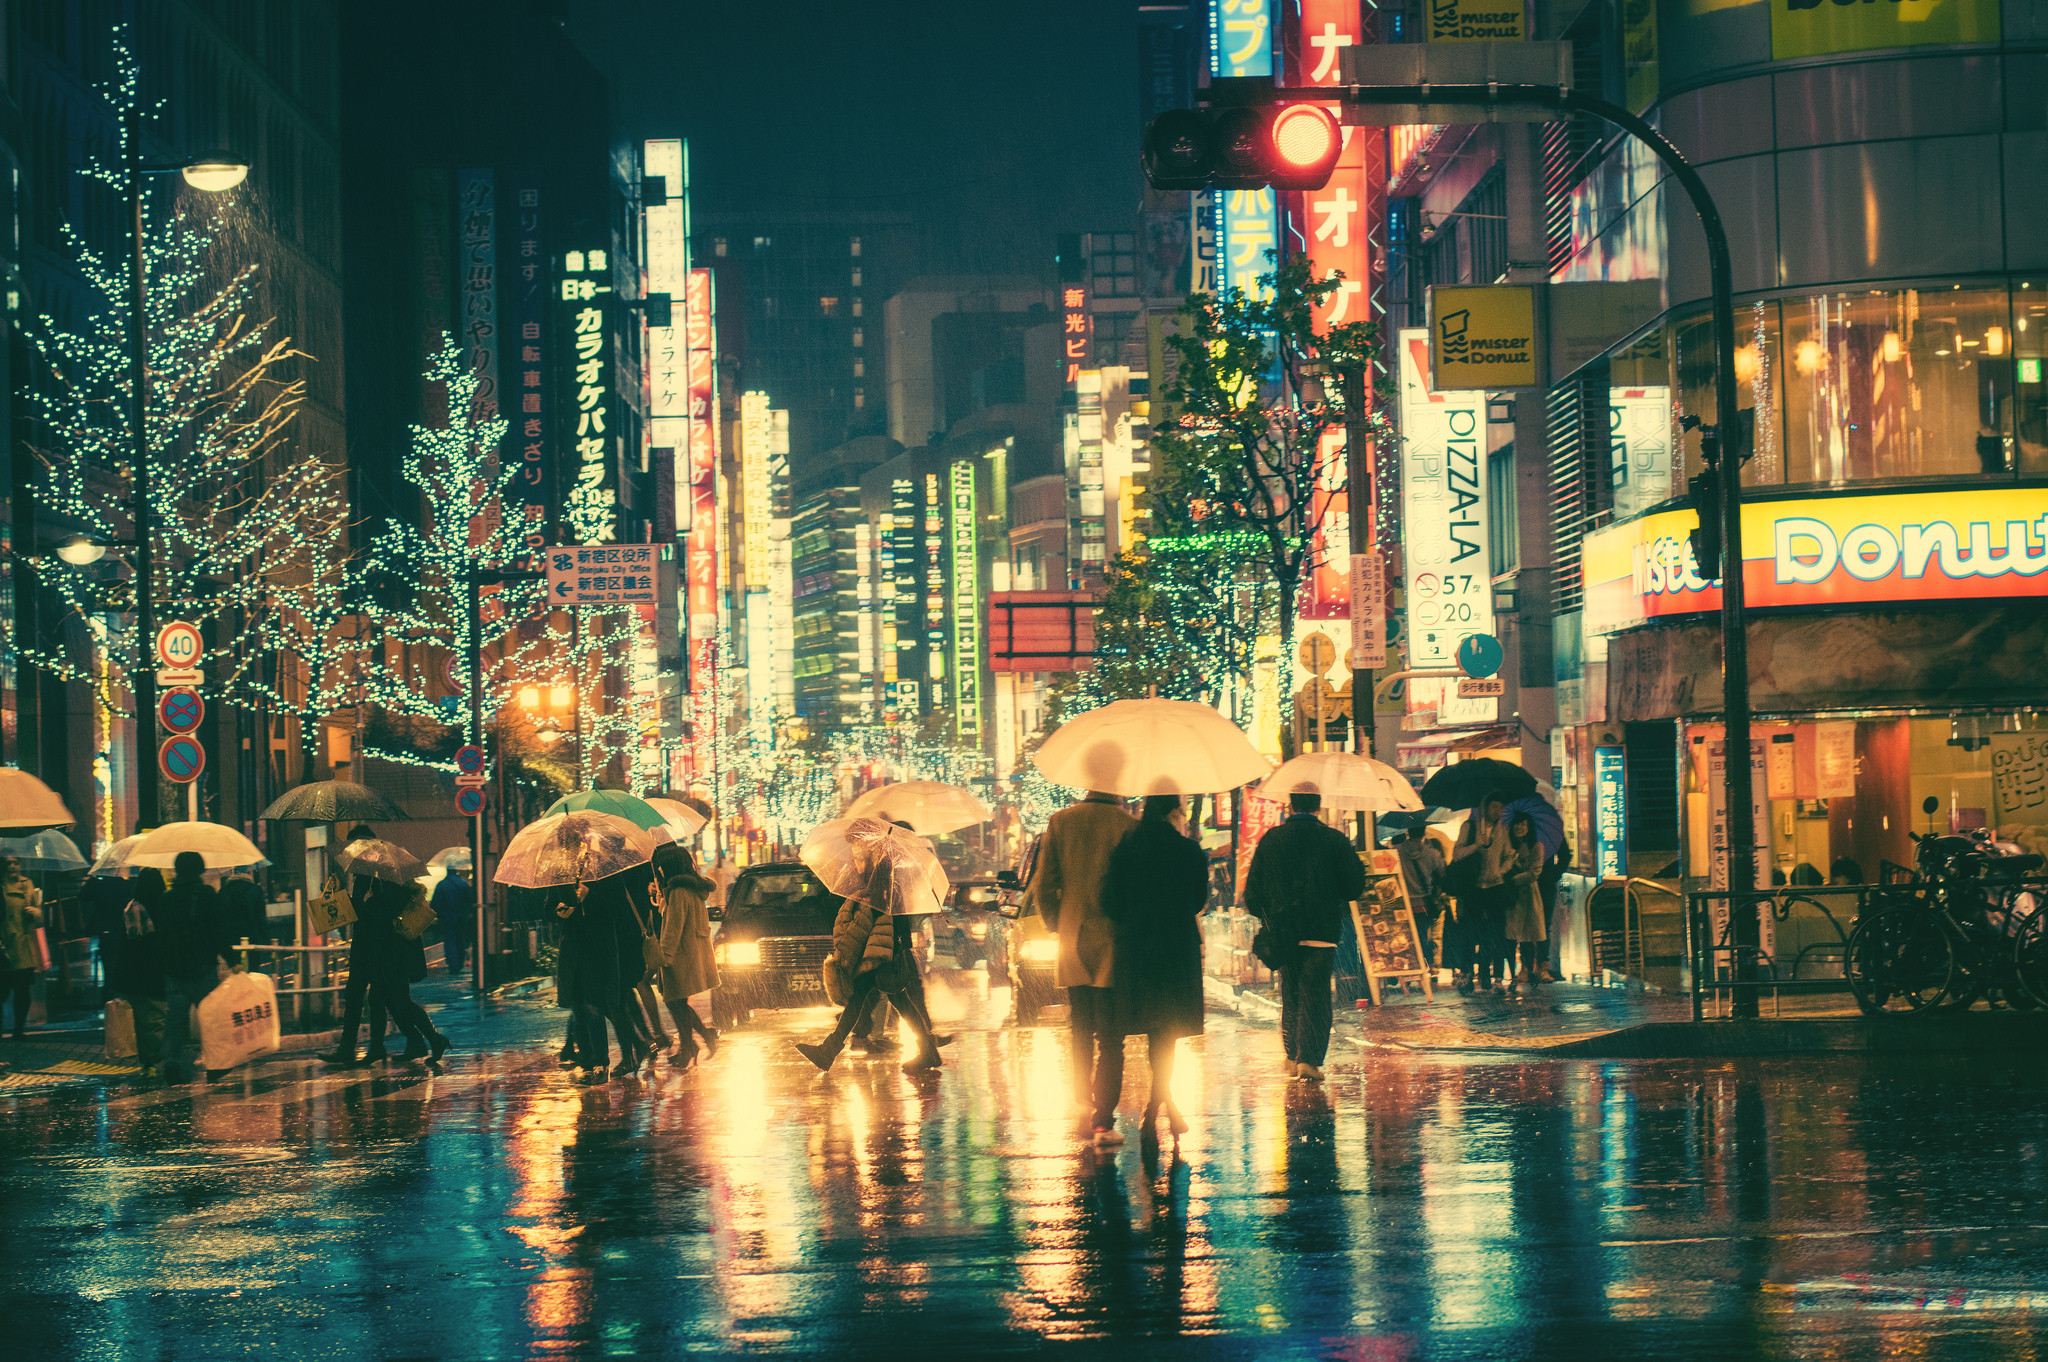 2048x1362 24519079014 bc40505ae6 k - amazing pictures of tokyo at night. 24519079014  bc40505ae6 k - amazing pictures of tokyo at night